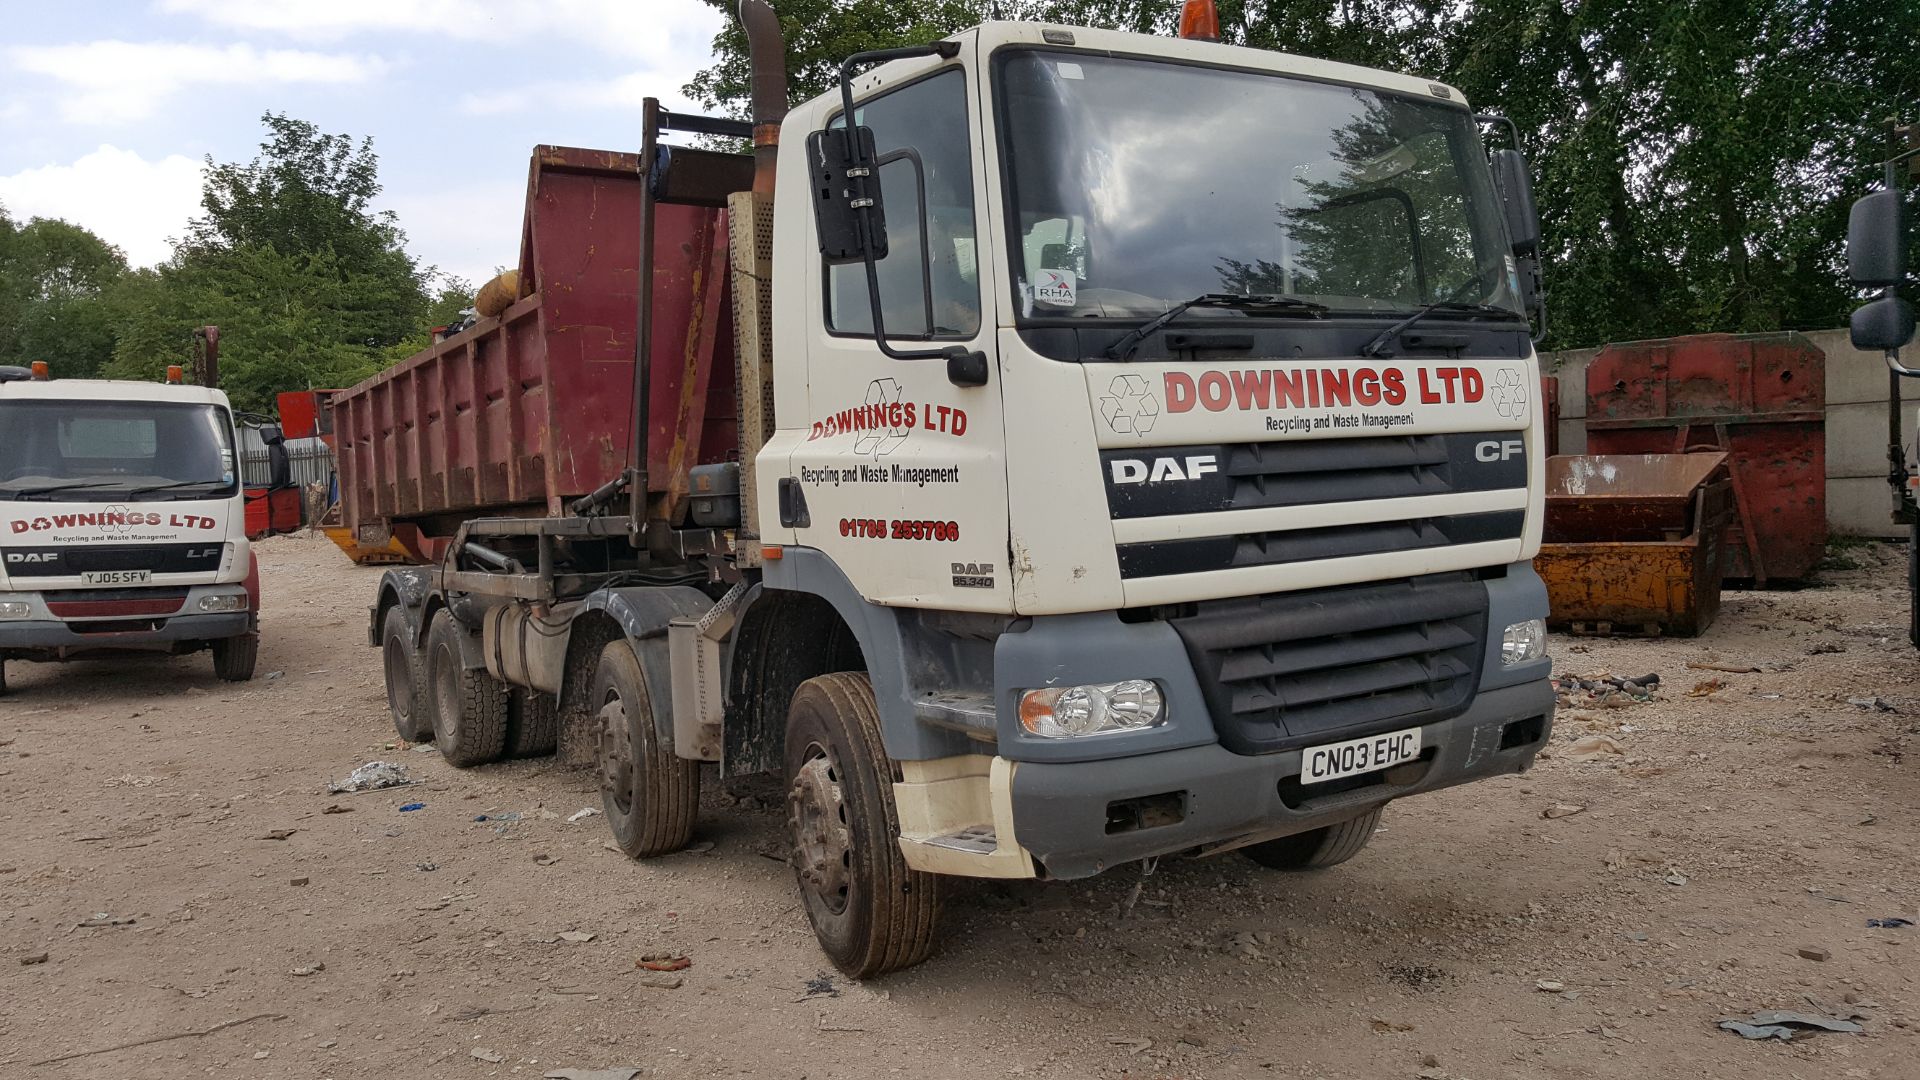 DAF FAD CF 85.340 32 tonne 4 axle rigid chassis roll on roll off skip lorry Recorded approx. KM - Image 2 of 2